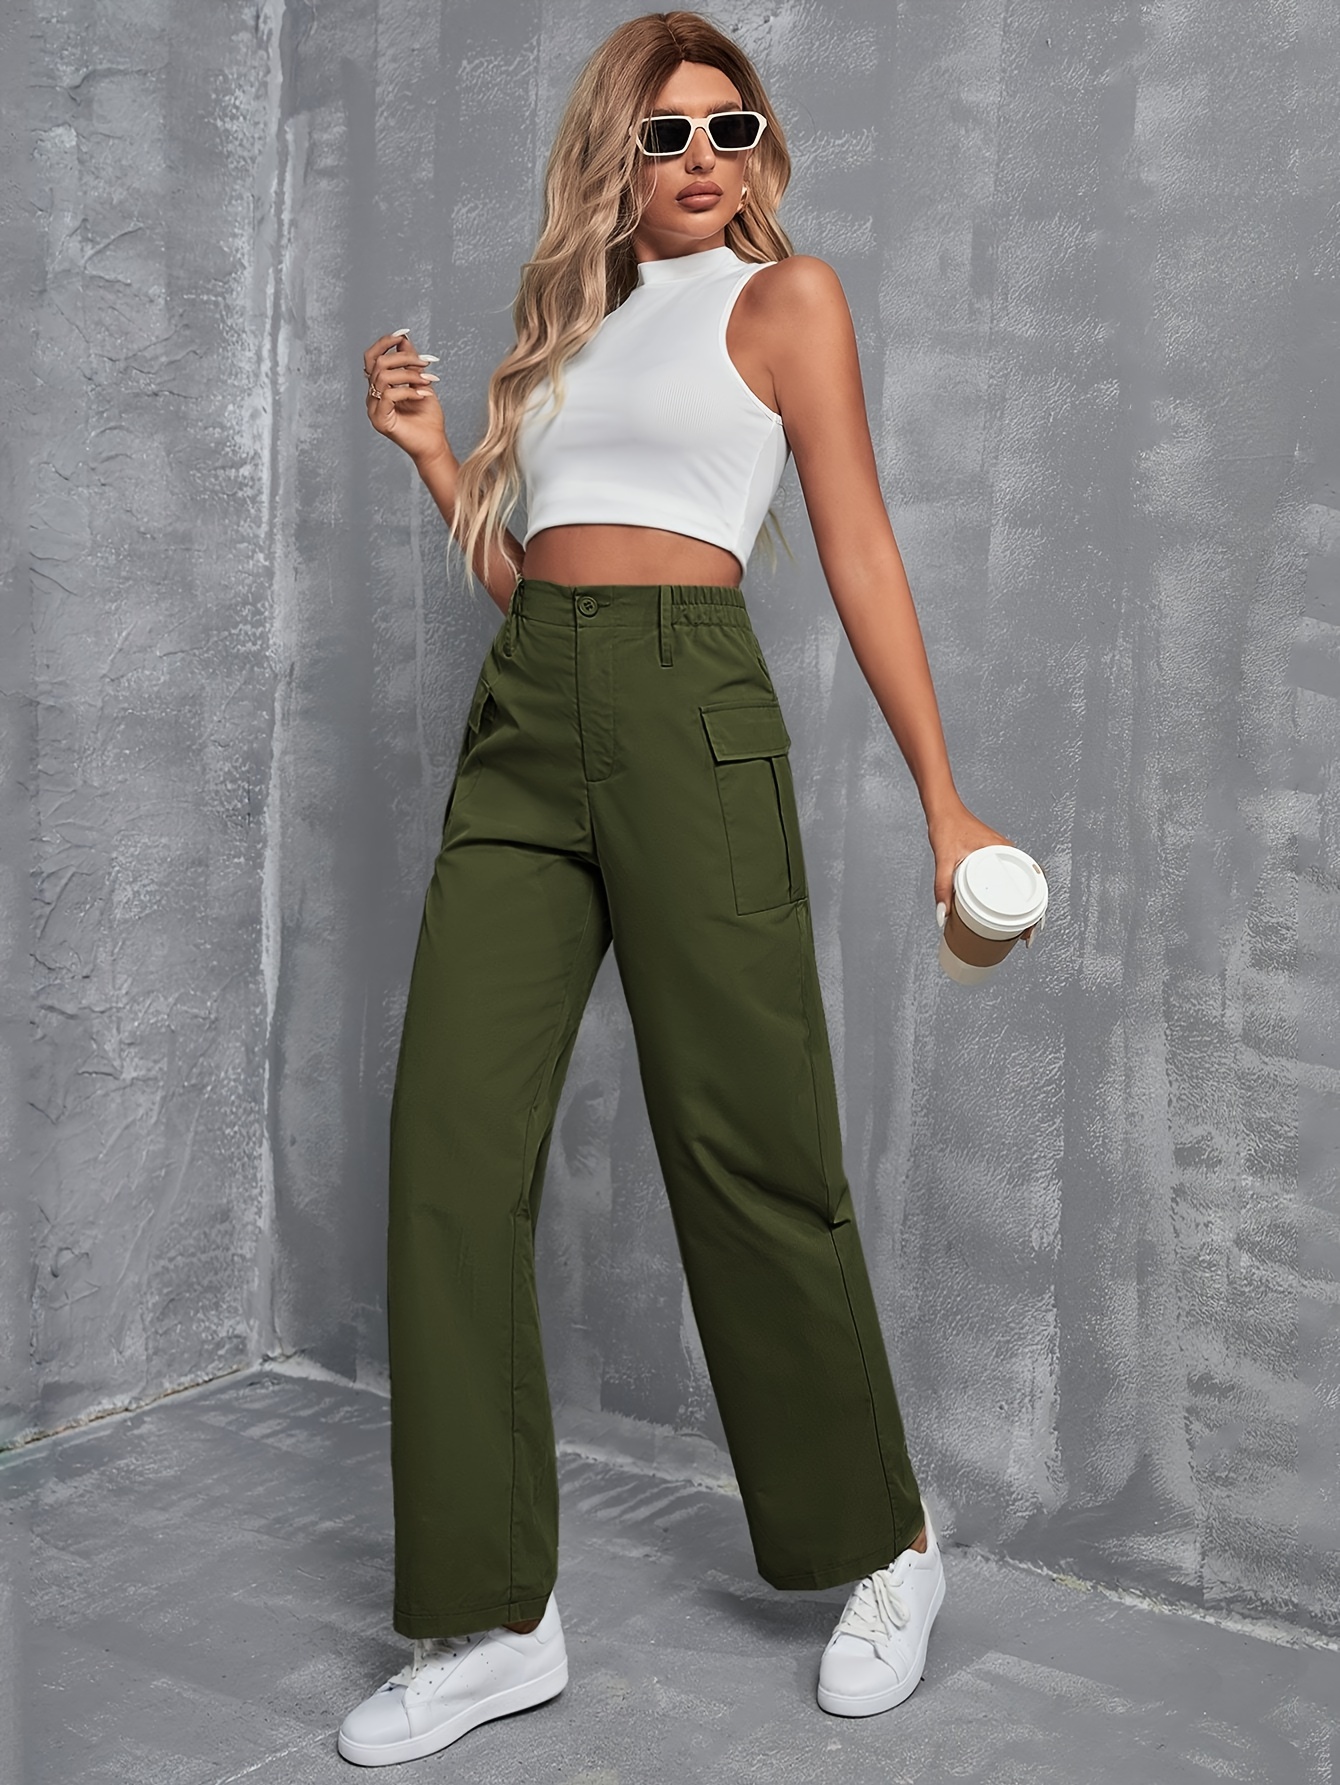 Solid High Waist Flap Pocket Cargo Trousers  Cargo pants women outfit, Cargo  pants outfit, Green pants outfit